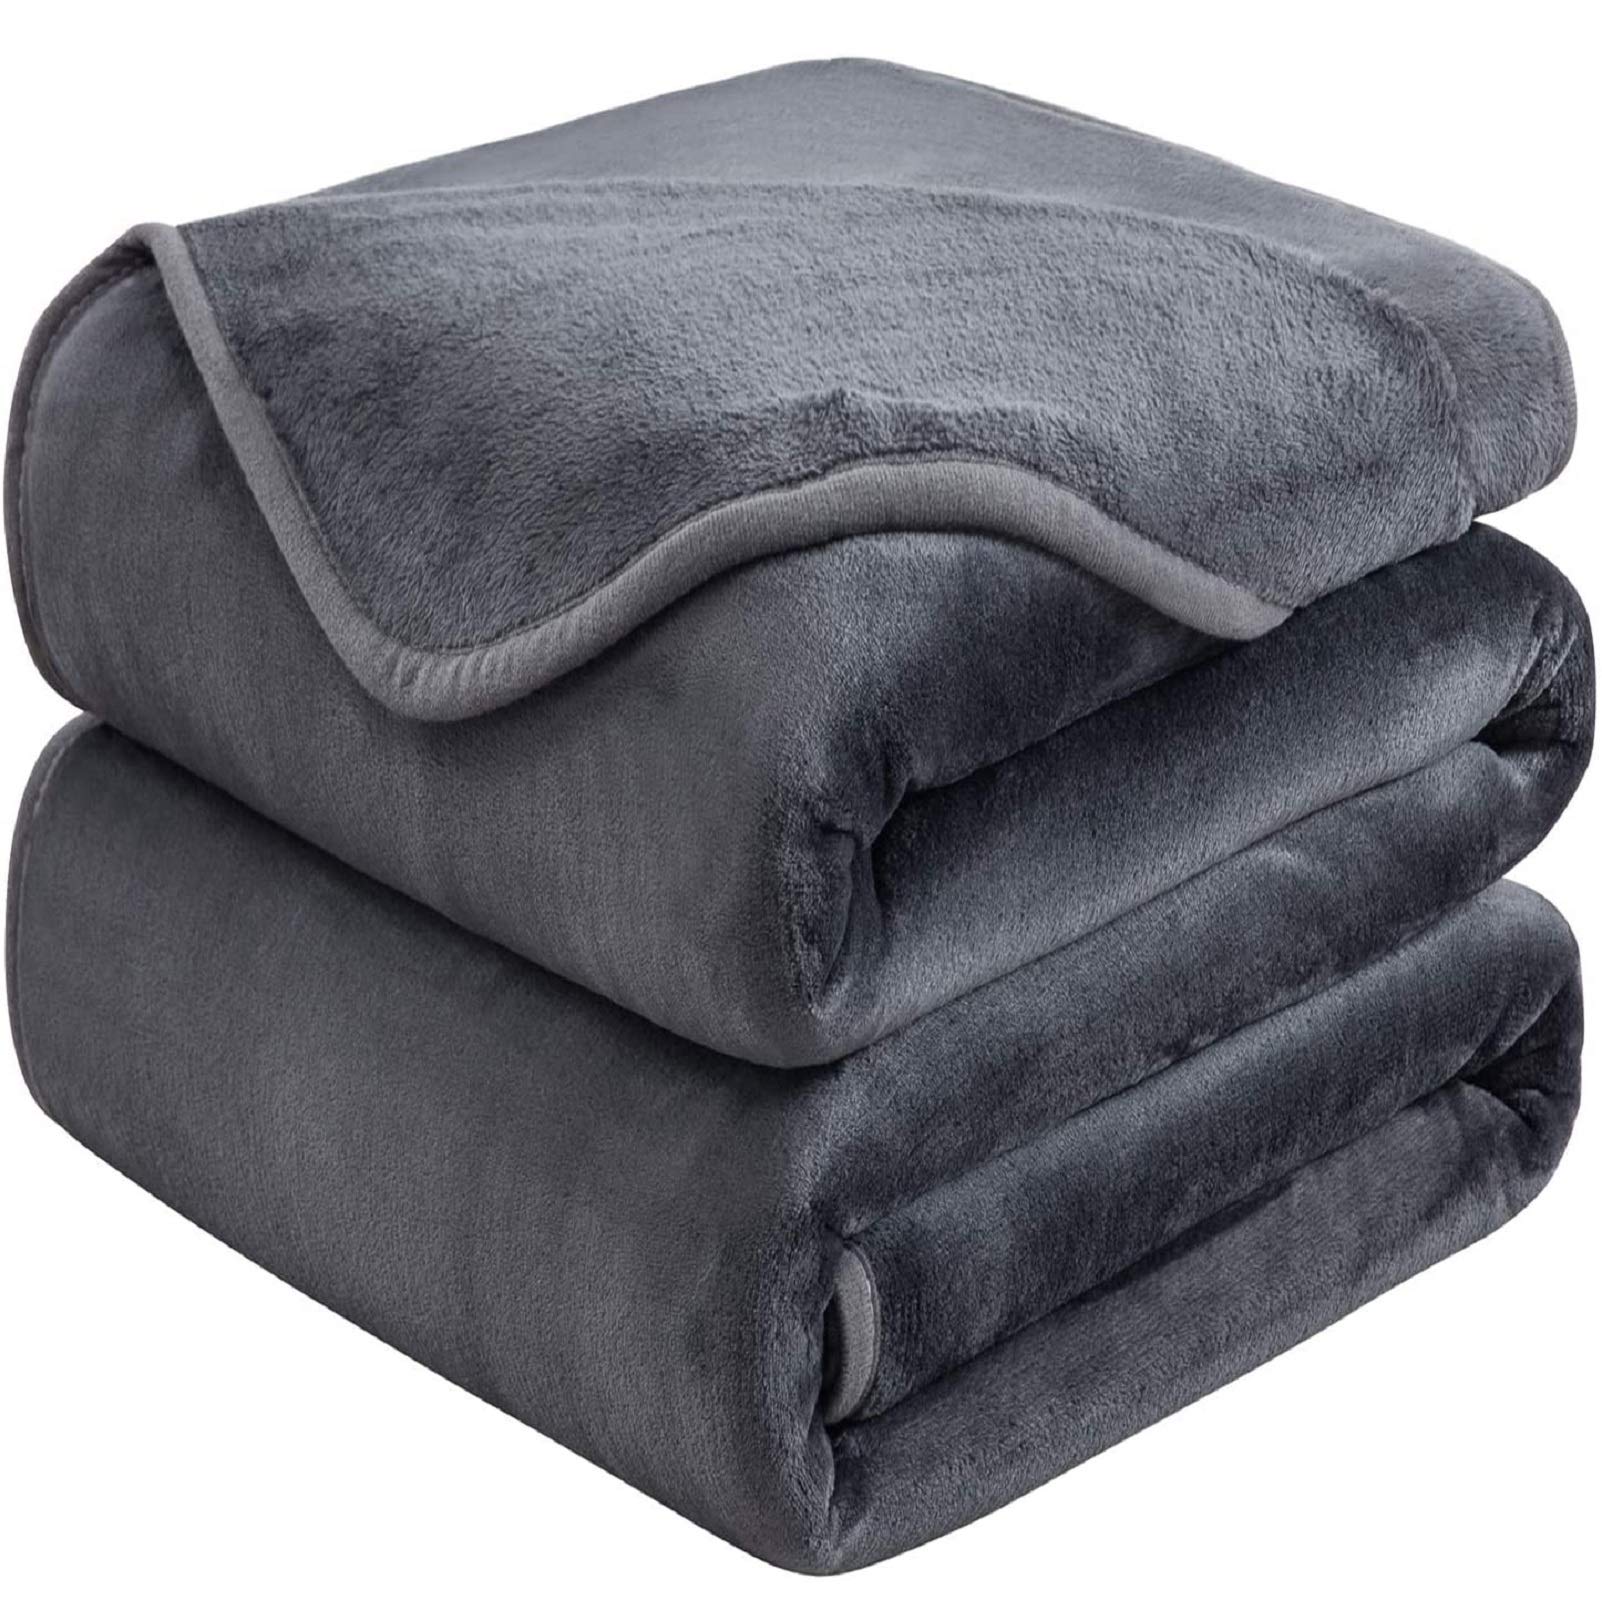 Book Cover Soft Queen Size Blanket for All Season Warm Fuzzy Microplush Lightweight Thermal Fleece Summer Autumn Fall Winter Spring Blankets for Queen Full Bed Couch Sofa,90x90 Inches,Dark Gray Queen (90-Inch-by-90-Inch) Dark Grey